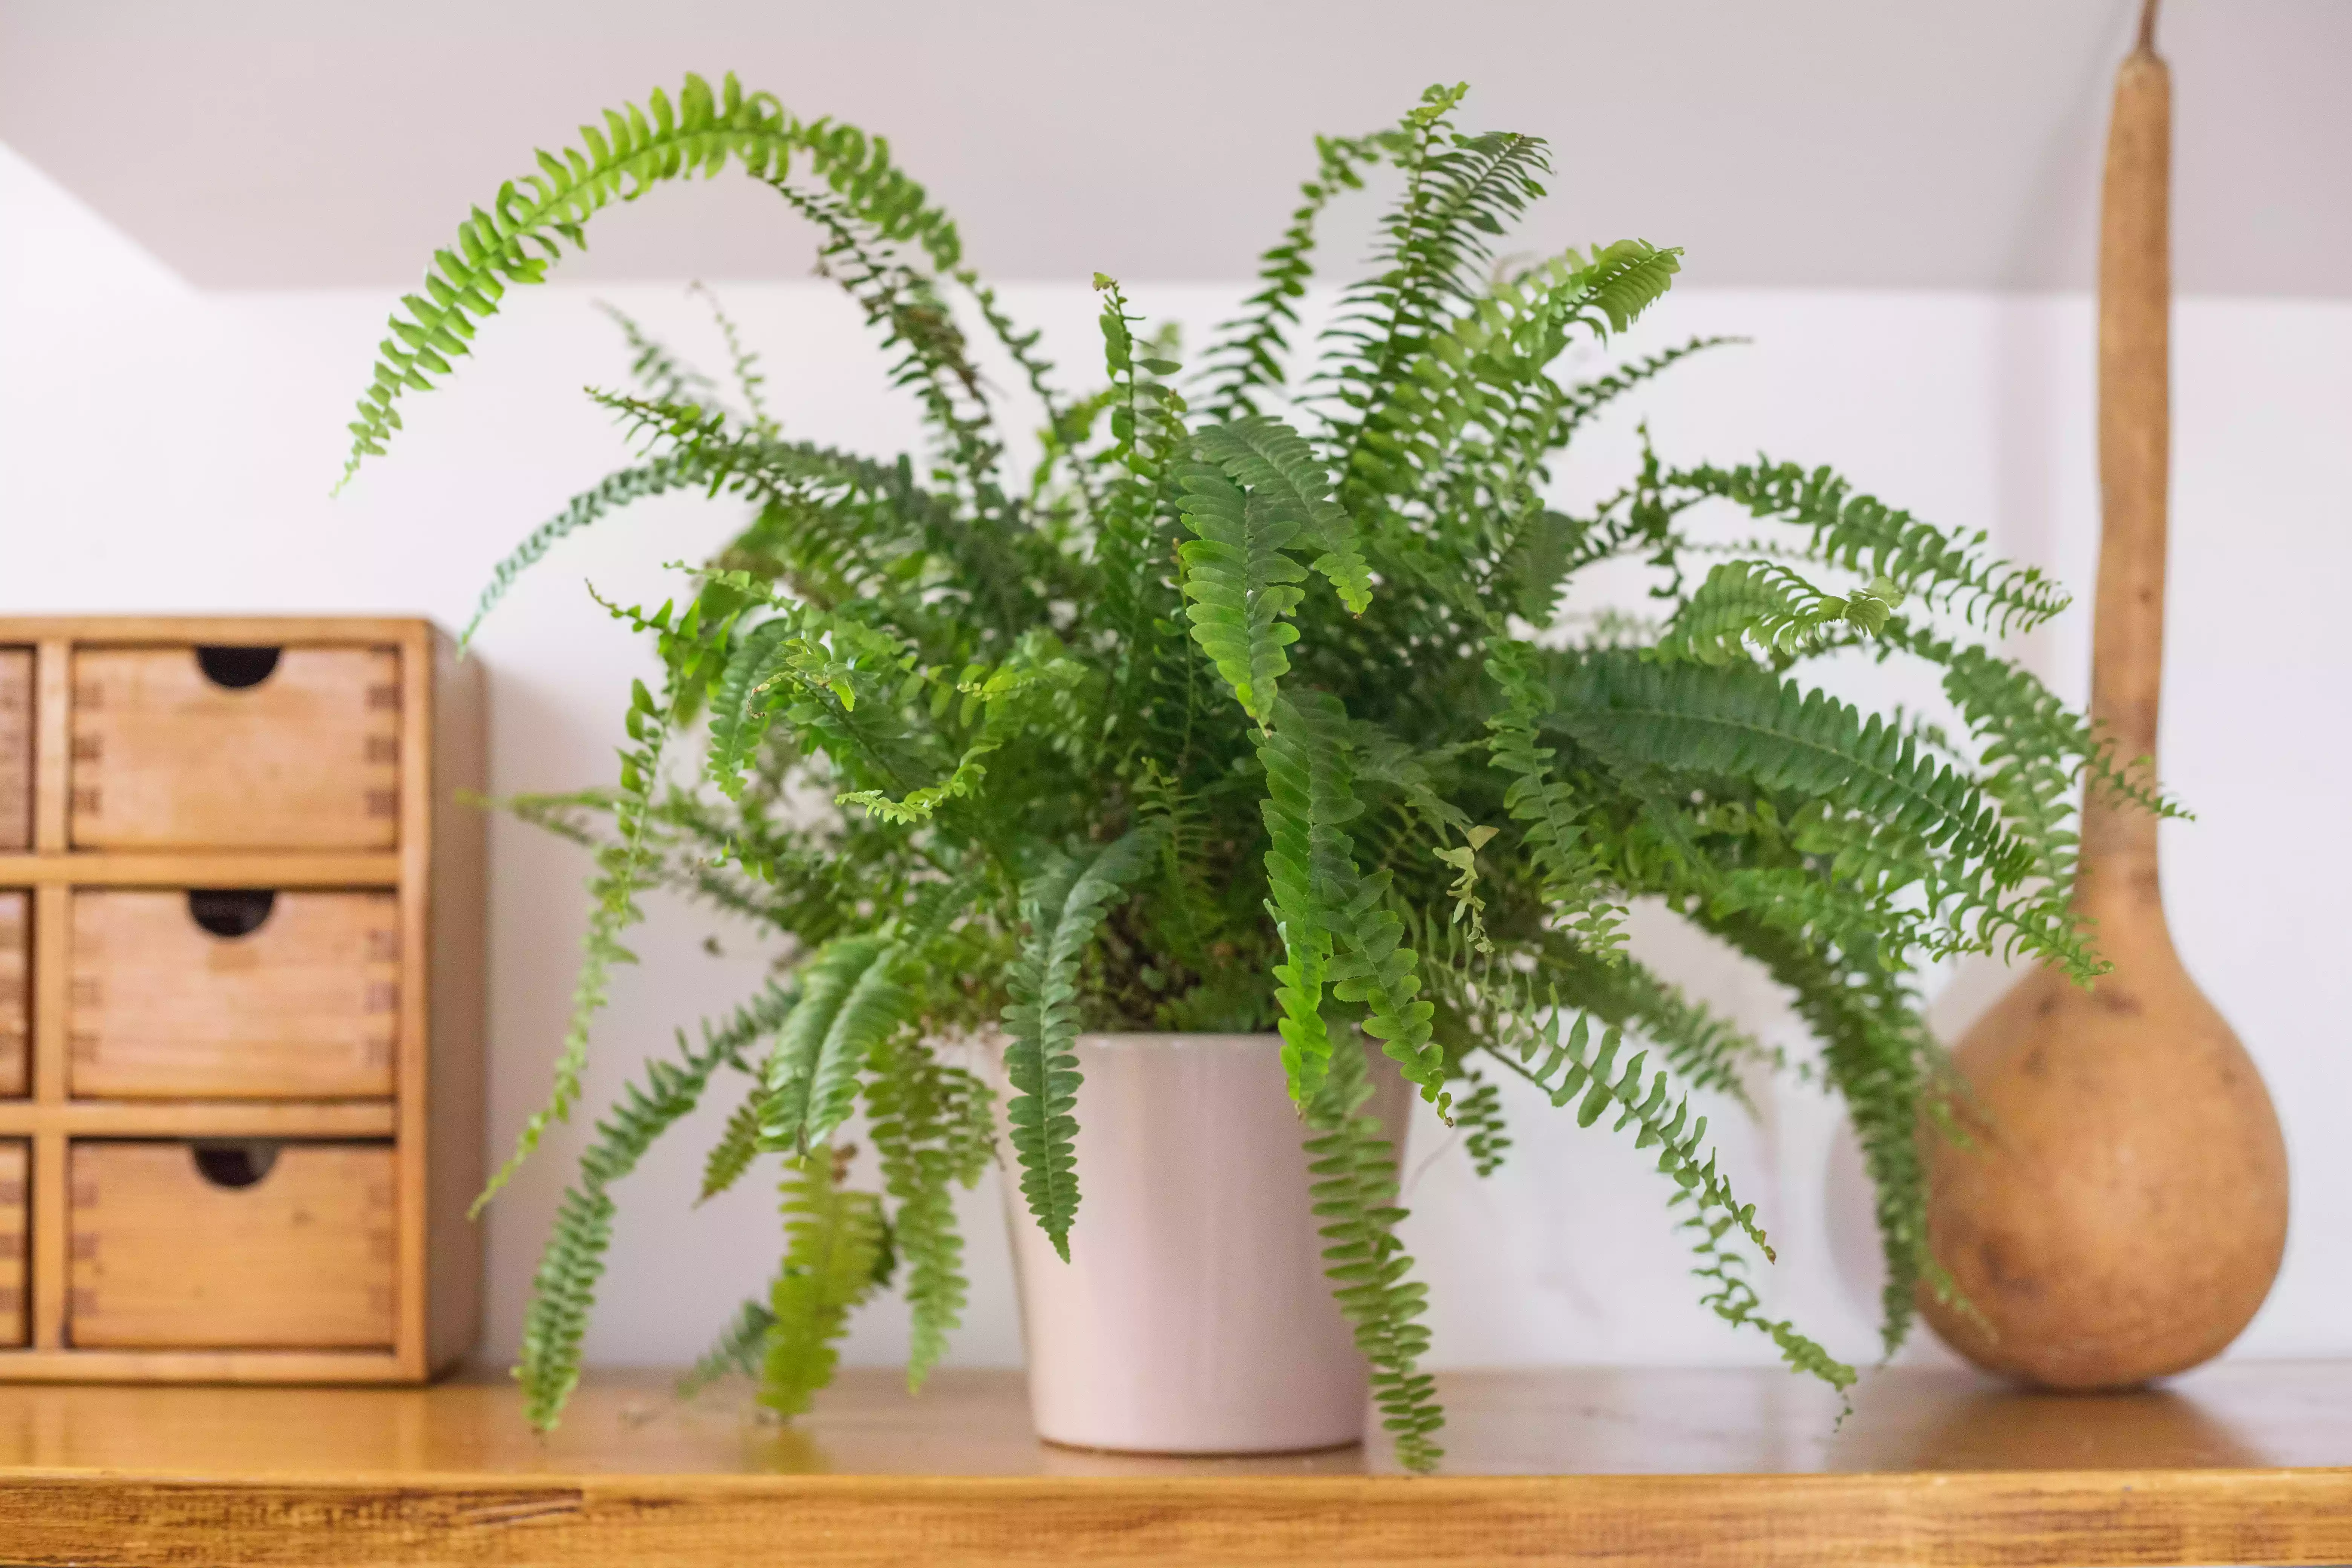 large fern house plant is displayed on wooden shelf next to other house decor